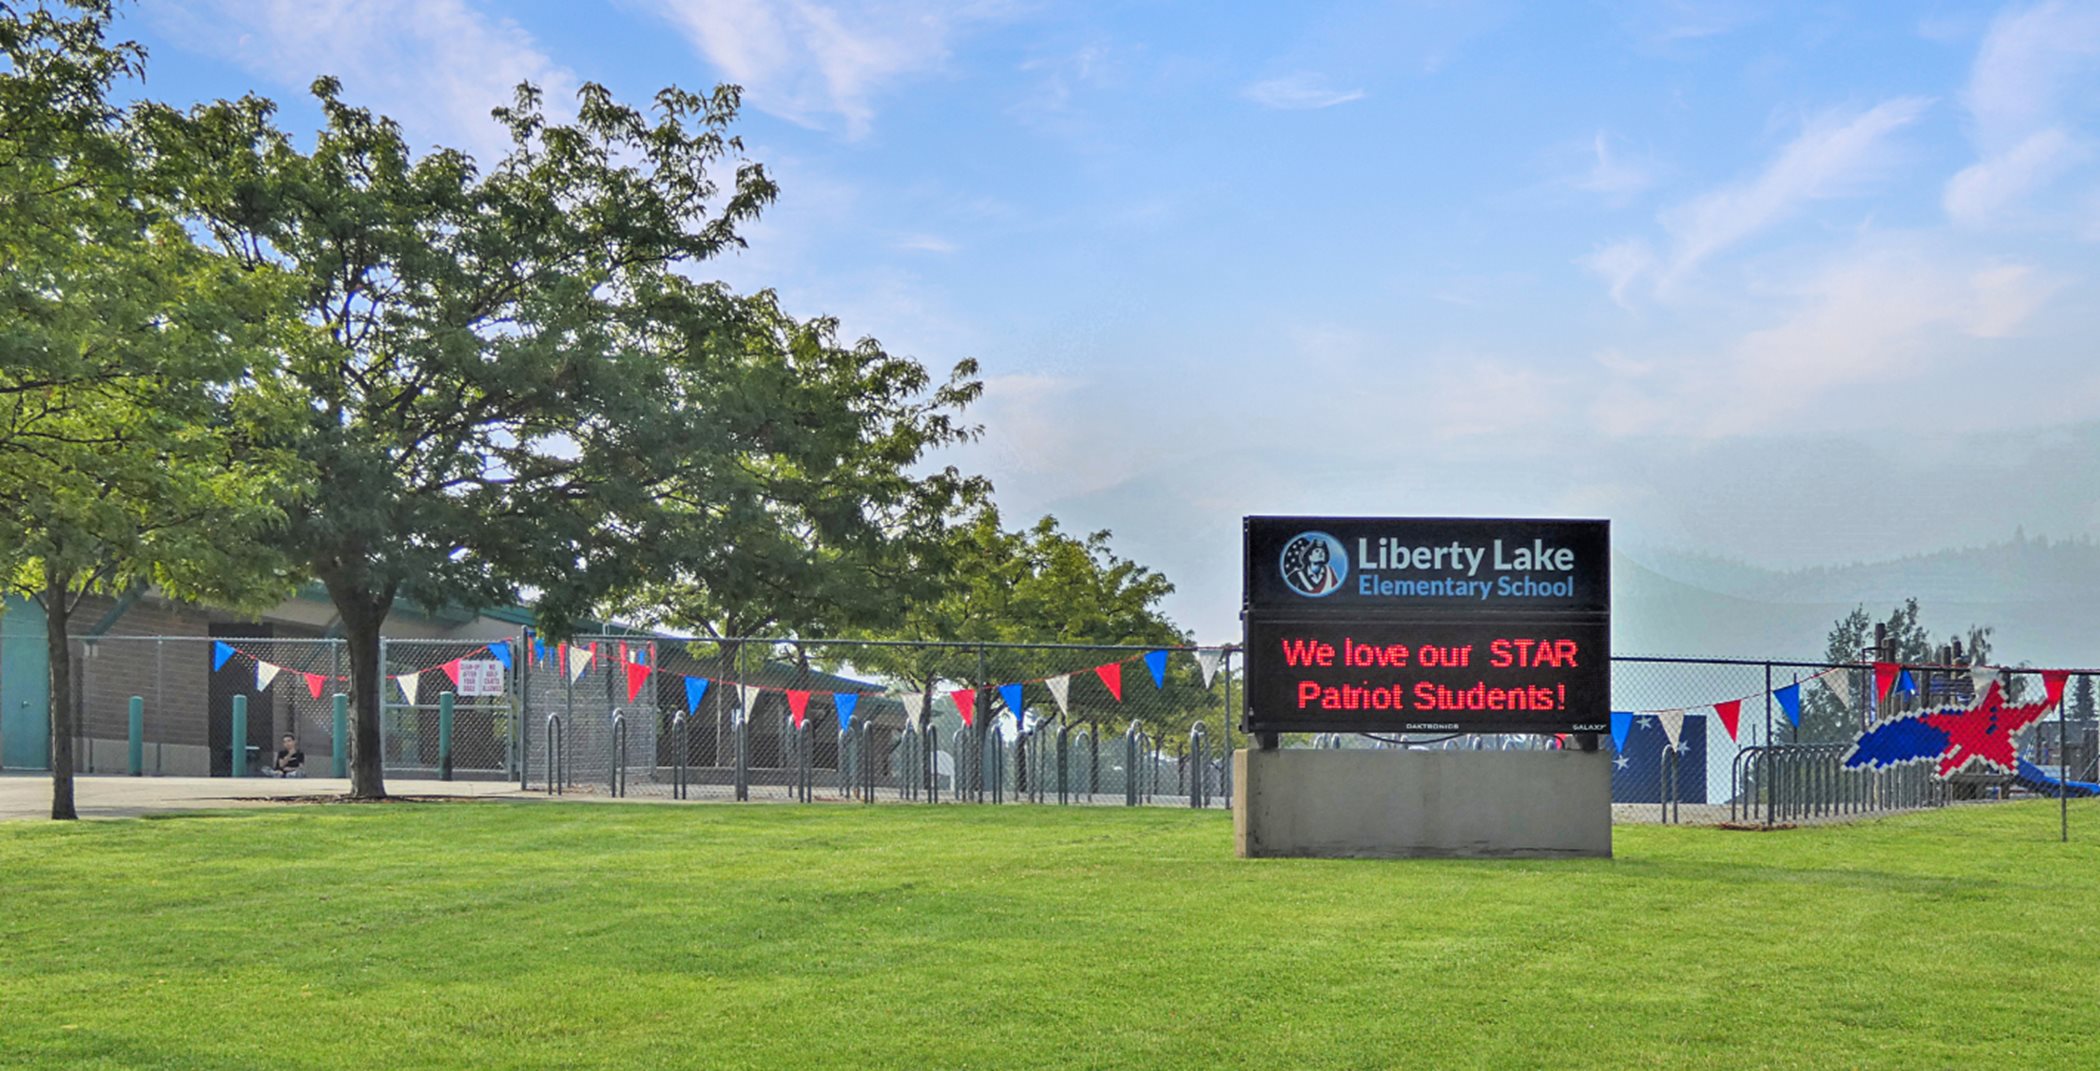 School entrance with automated sign that says, "We love our STAR Patriot Students!"